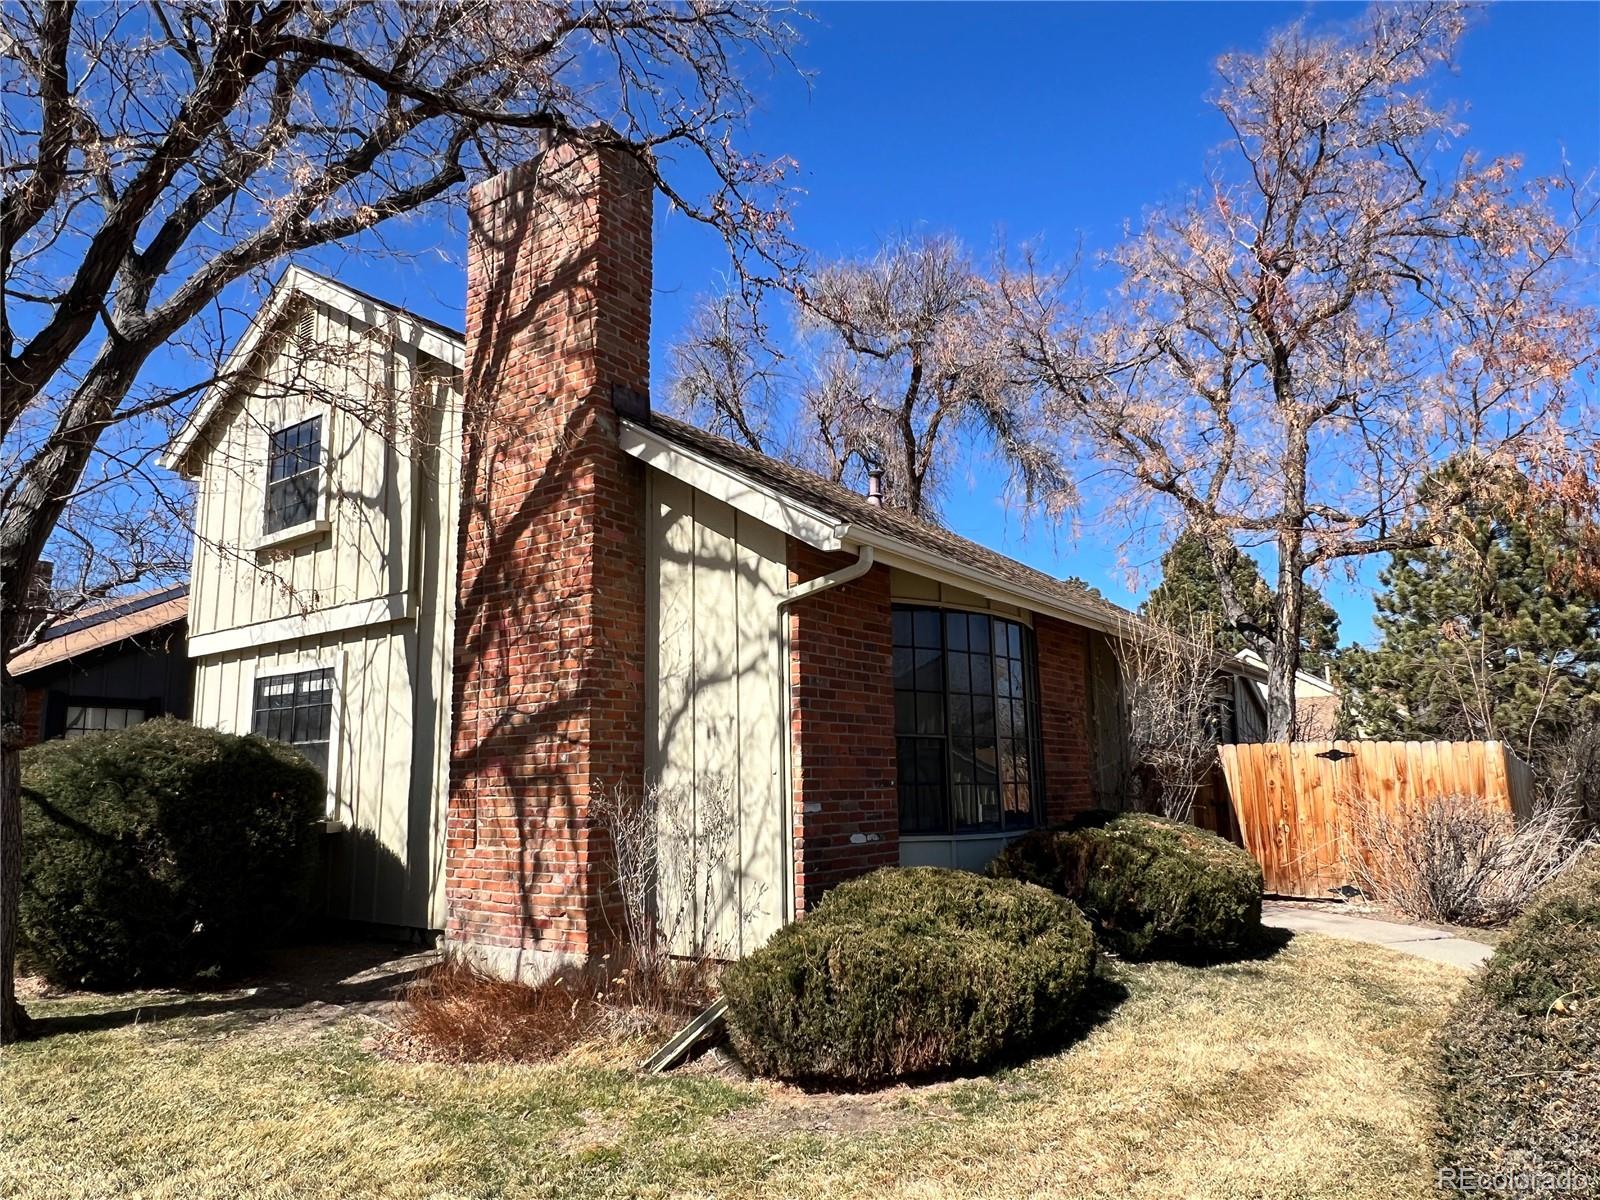 8688  garrison court, Arvada sold home. Closed on 2024-04-09 for $483,500.